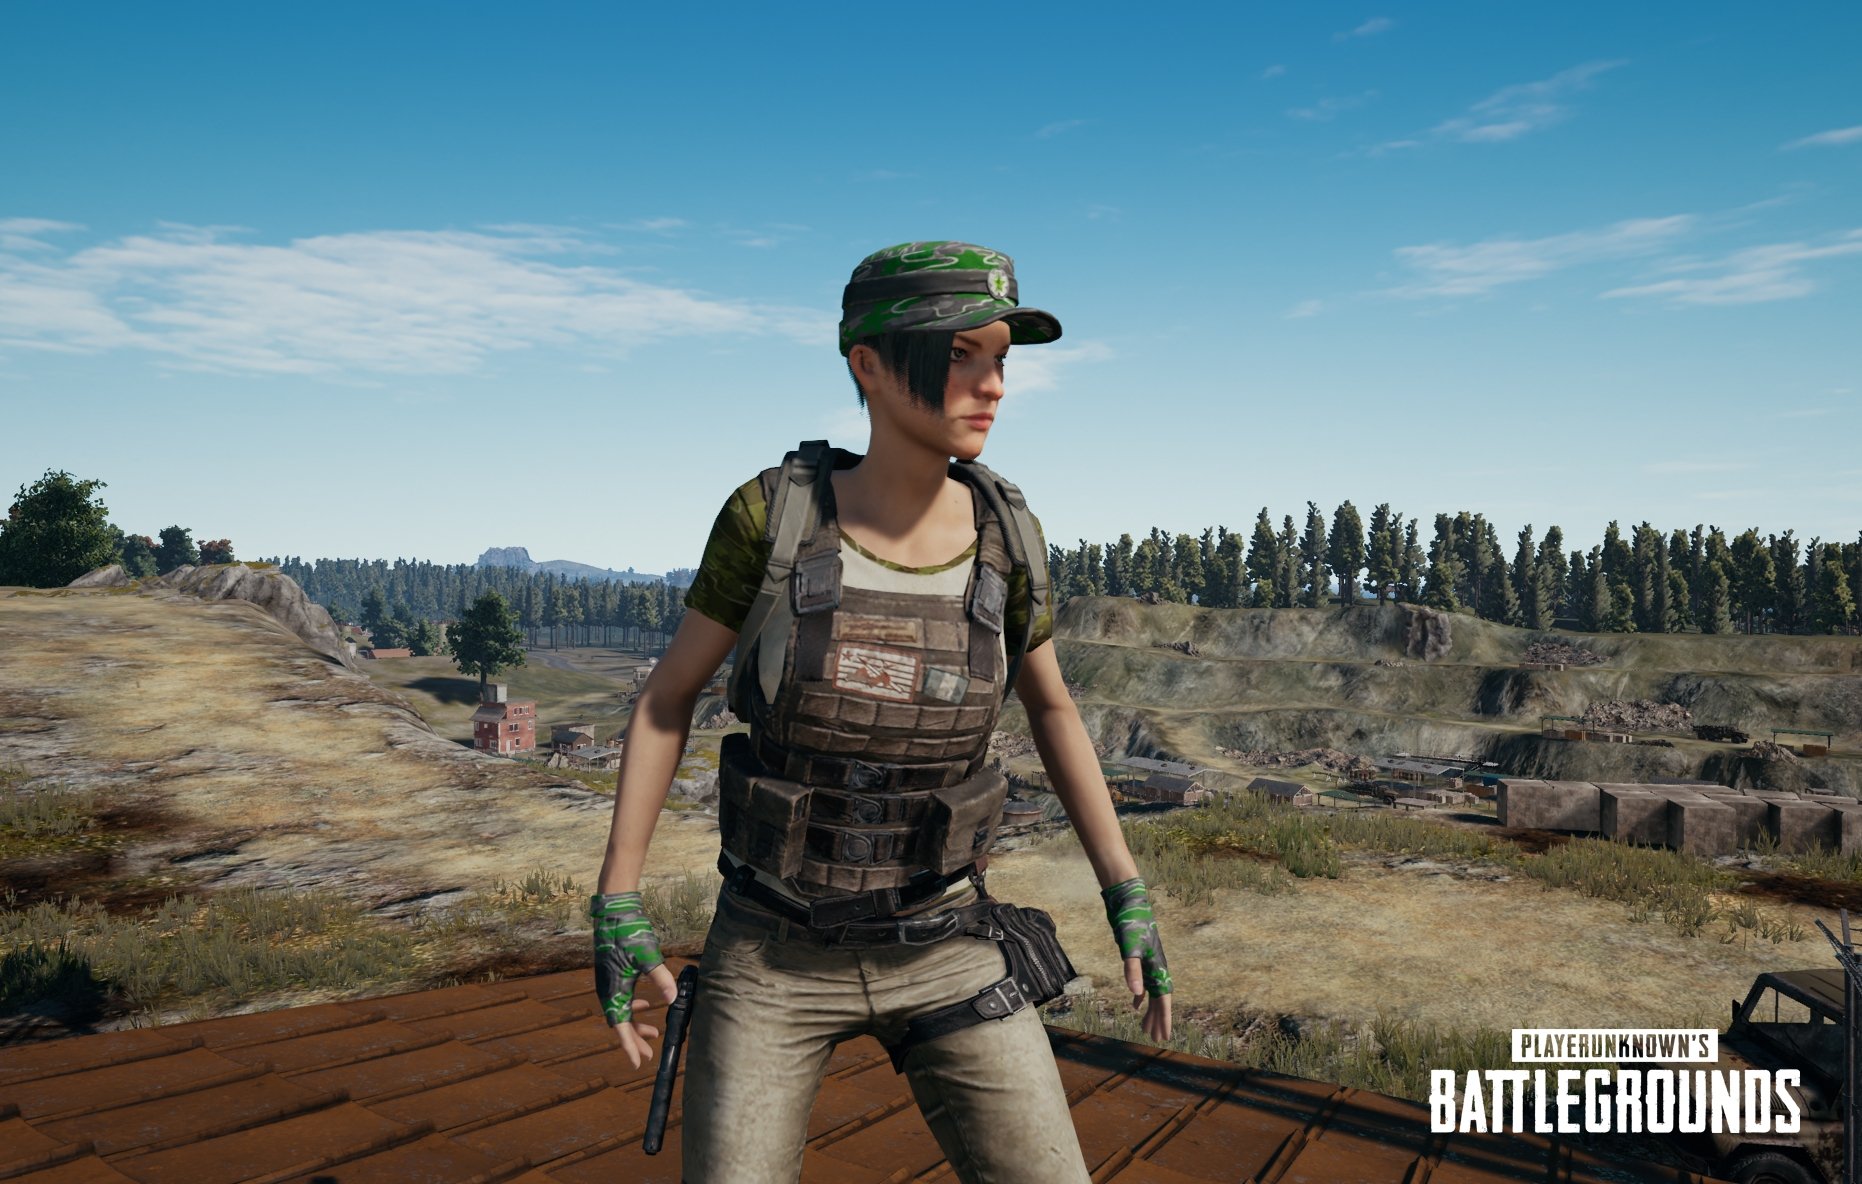 New PlayerUnknown's Battlegrounds Xbox update vehicles, adds bug fixes | Windows Central